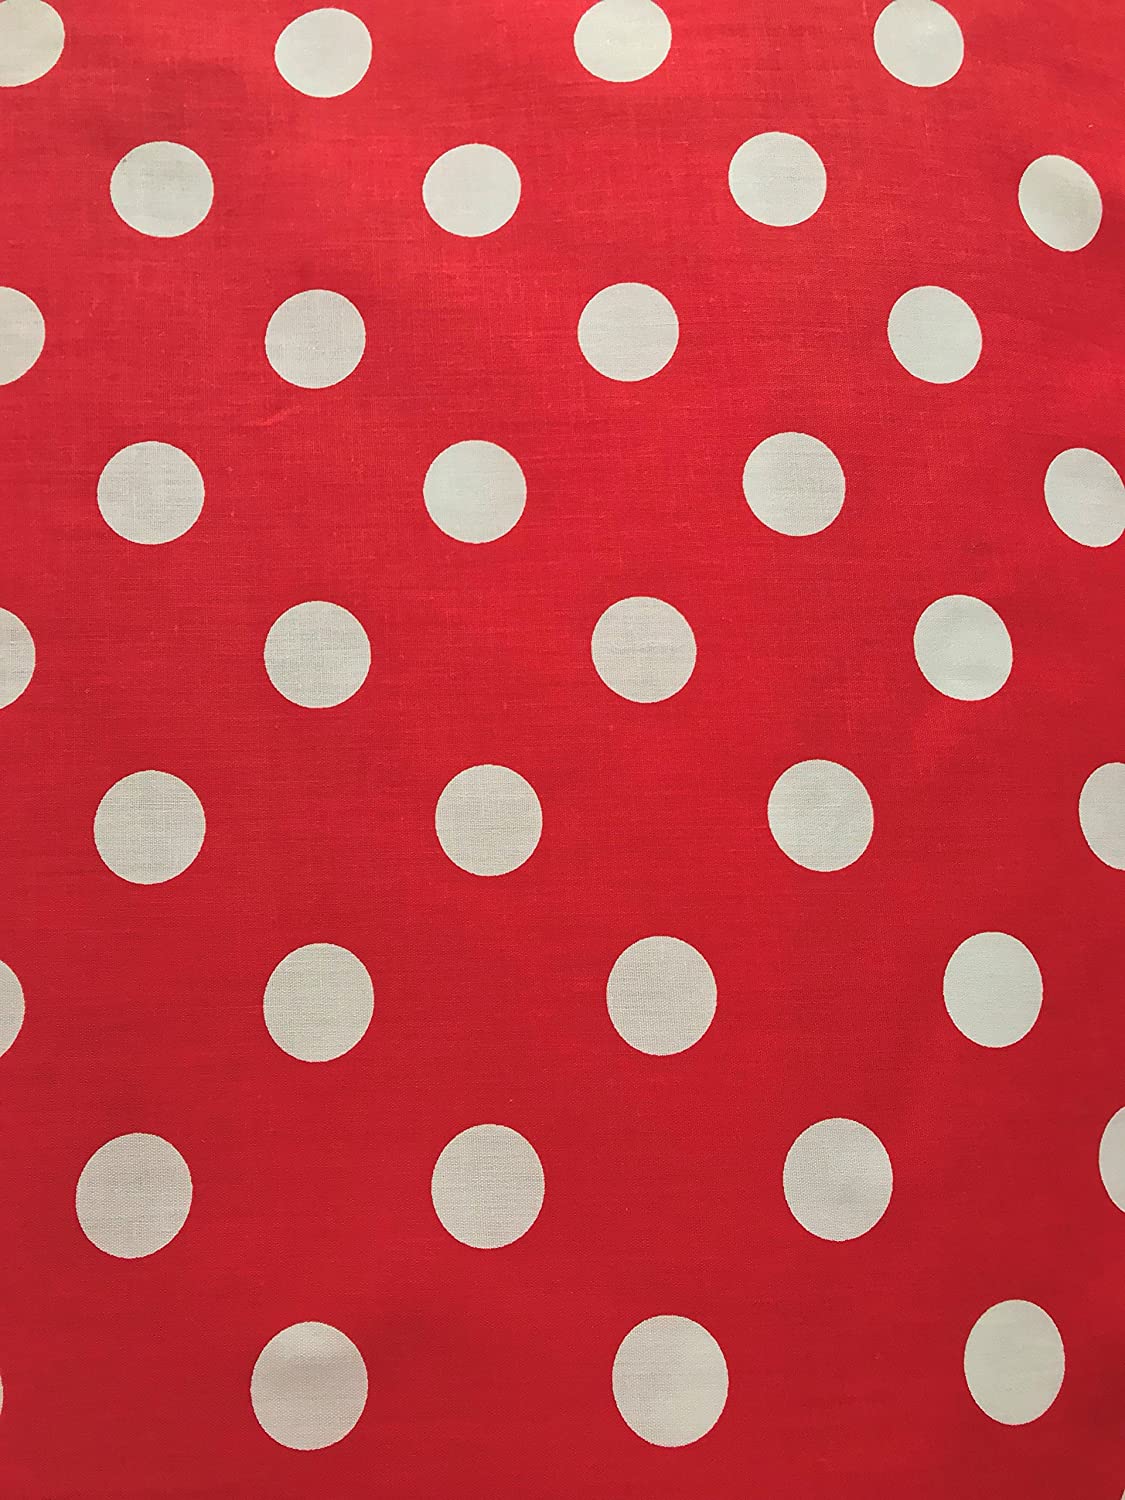 Big Polka Dots Poly Cotton Print Fabric by The Yard (Red/White Dots)